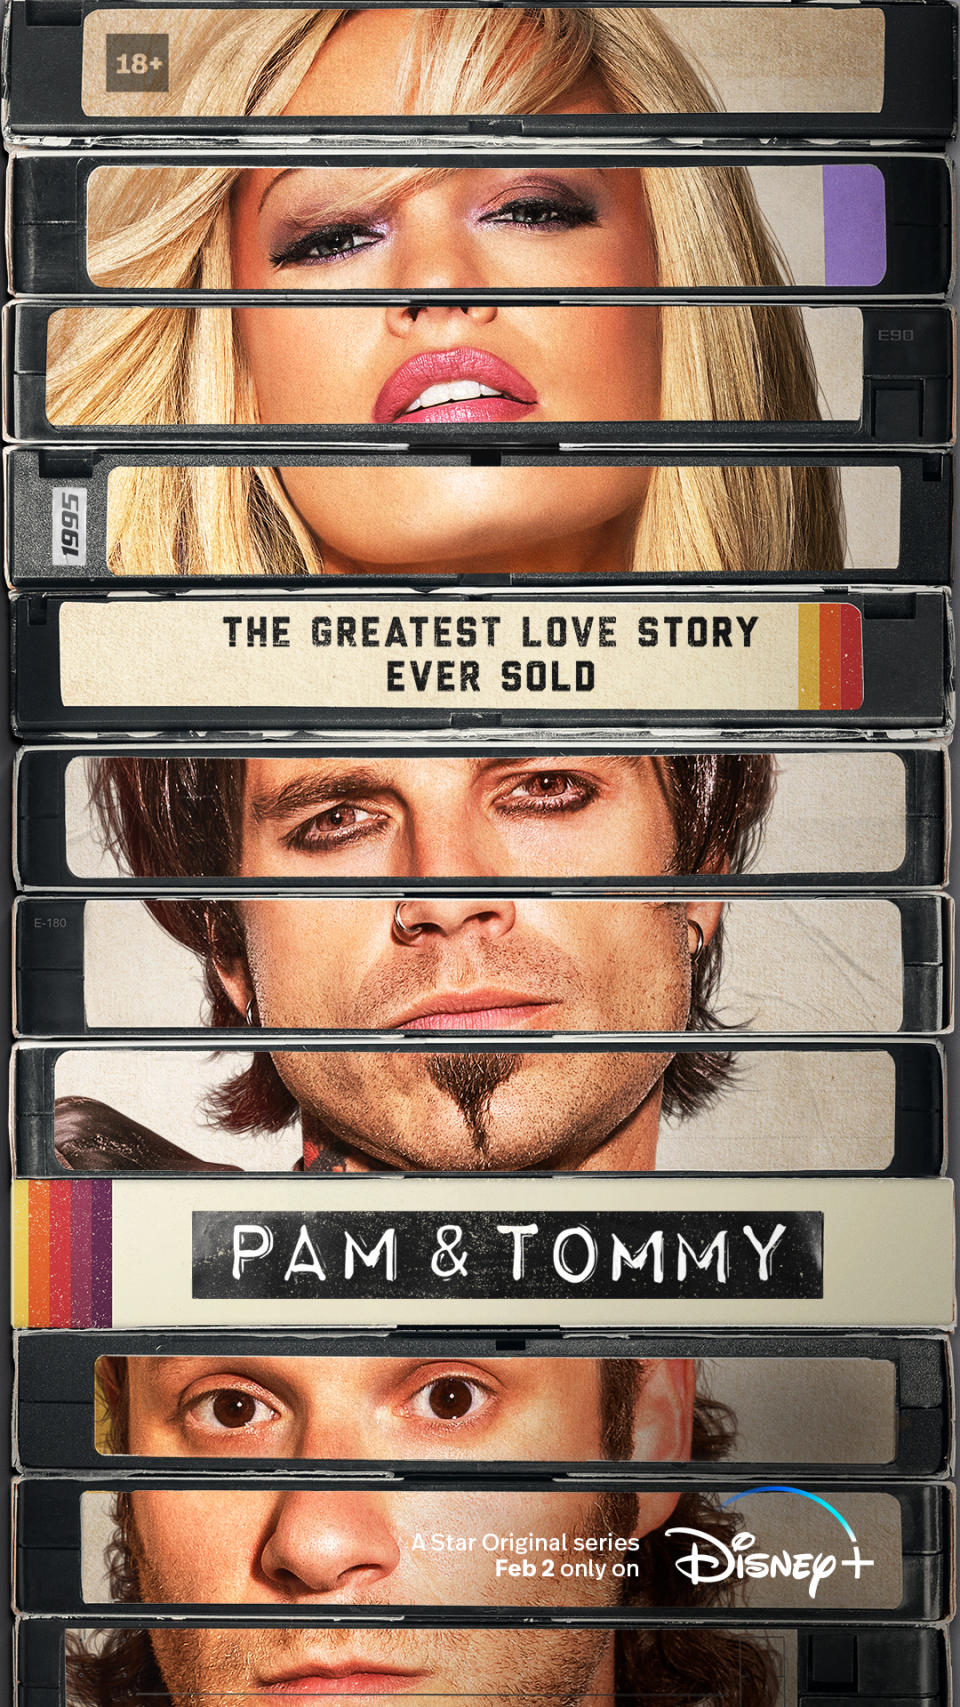 Pam and Tommy tells the story of how the private video made by Pamela Anderson and Motley Crew drummer Tommy Lee turned into a global sensation (Disney/PA)